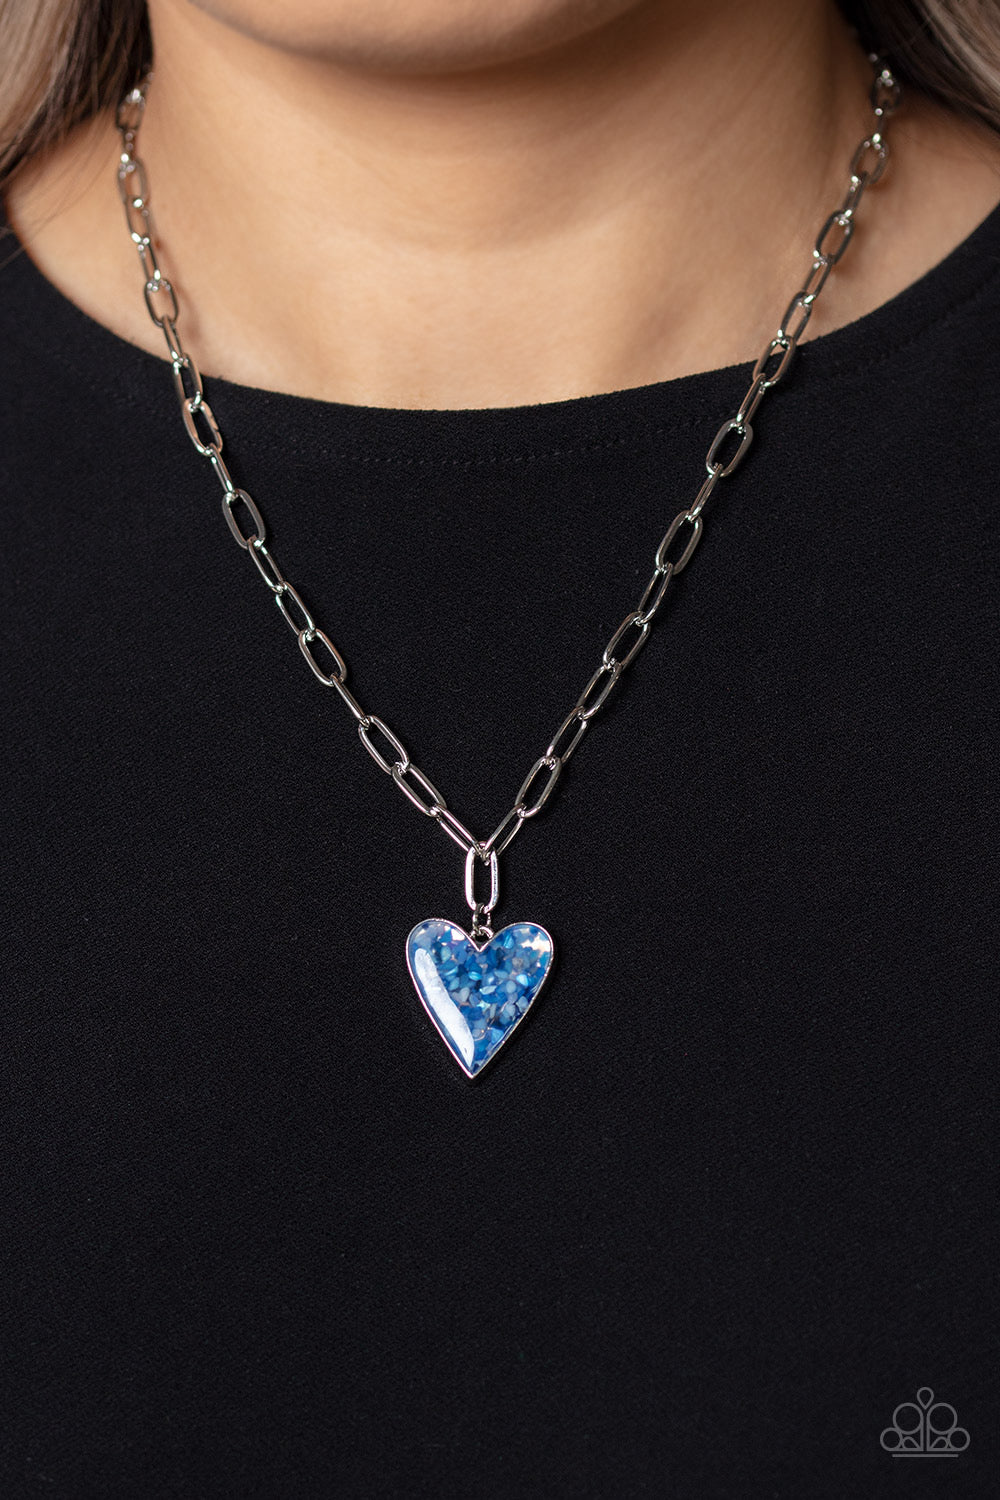 Paparazzi Kiss and SHELL - Blue Heart Necklace -Paparazzi Jewelry Images 